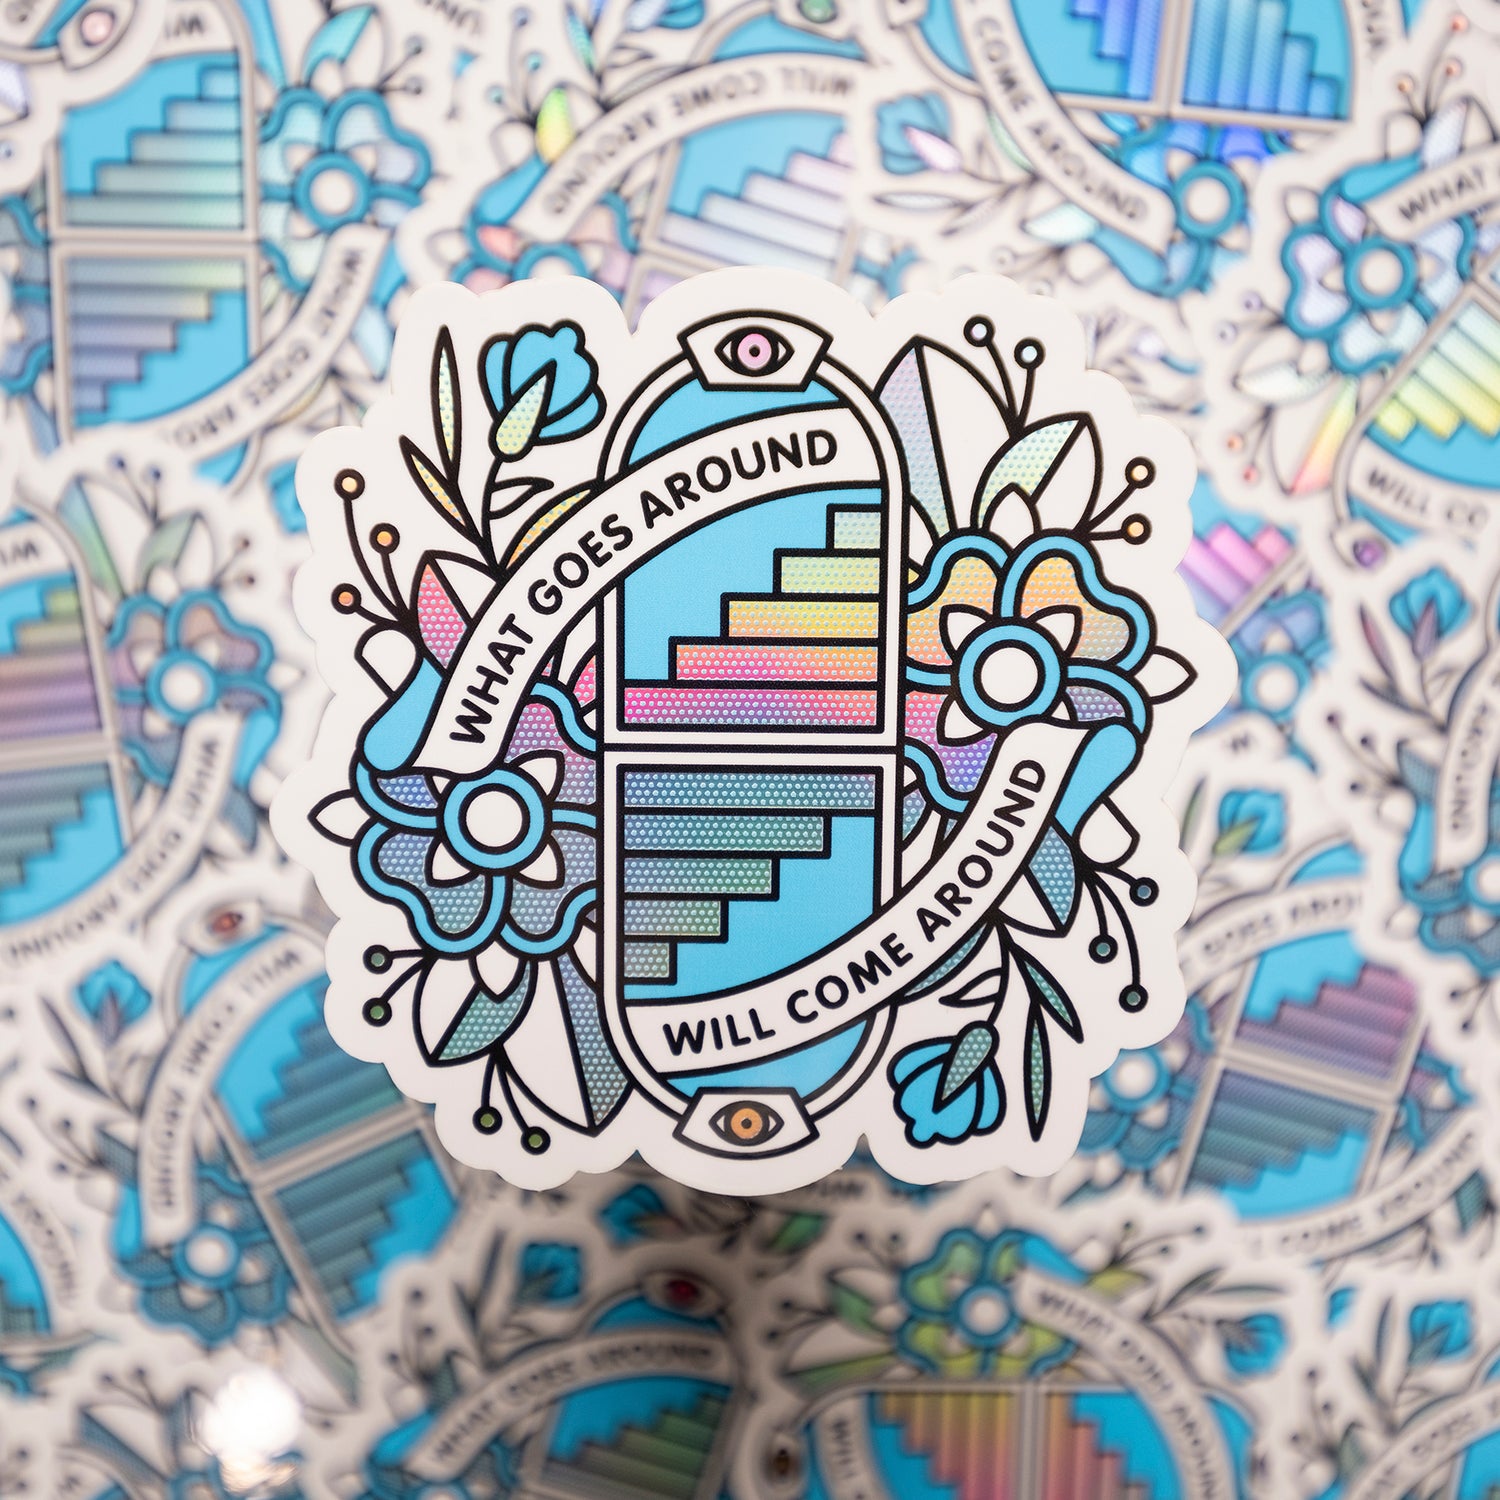 A 3.4x3.3" holographic vinyl art sticker of a symmetrical illustration of opposing arches with staircases that lead up or down surrounds by flowers. Banner are protruding from the arches in a circular composition that read: What goes around will come around. Drawn in a flash tattoo and pop art fusion style in a cyan, white and black color palette by the artist, Red Halftone.